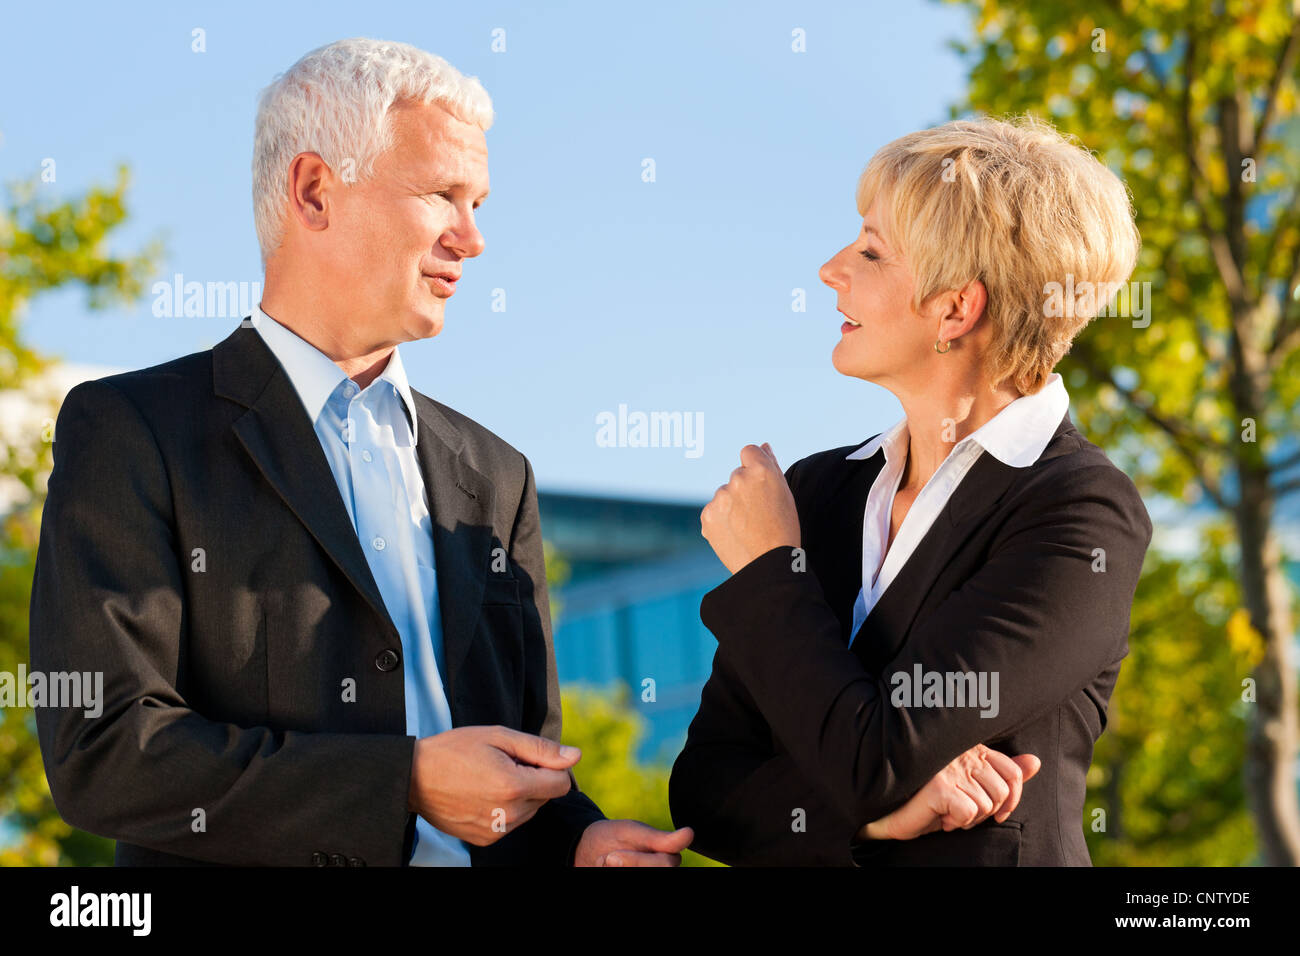 Business people - mature or senior - standing in a park outdoors talking Stock Photo